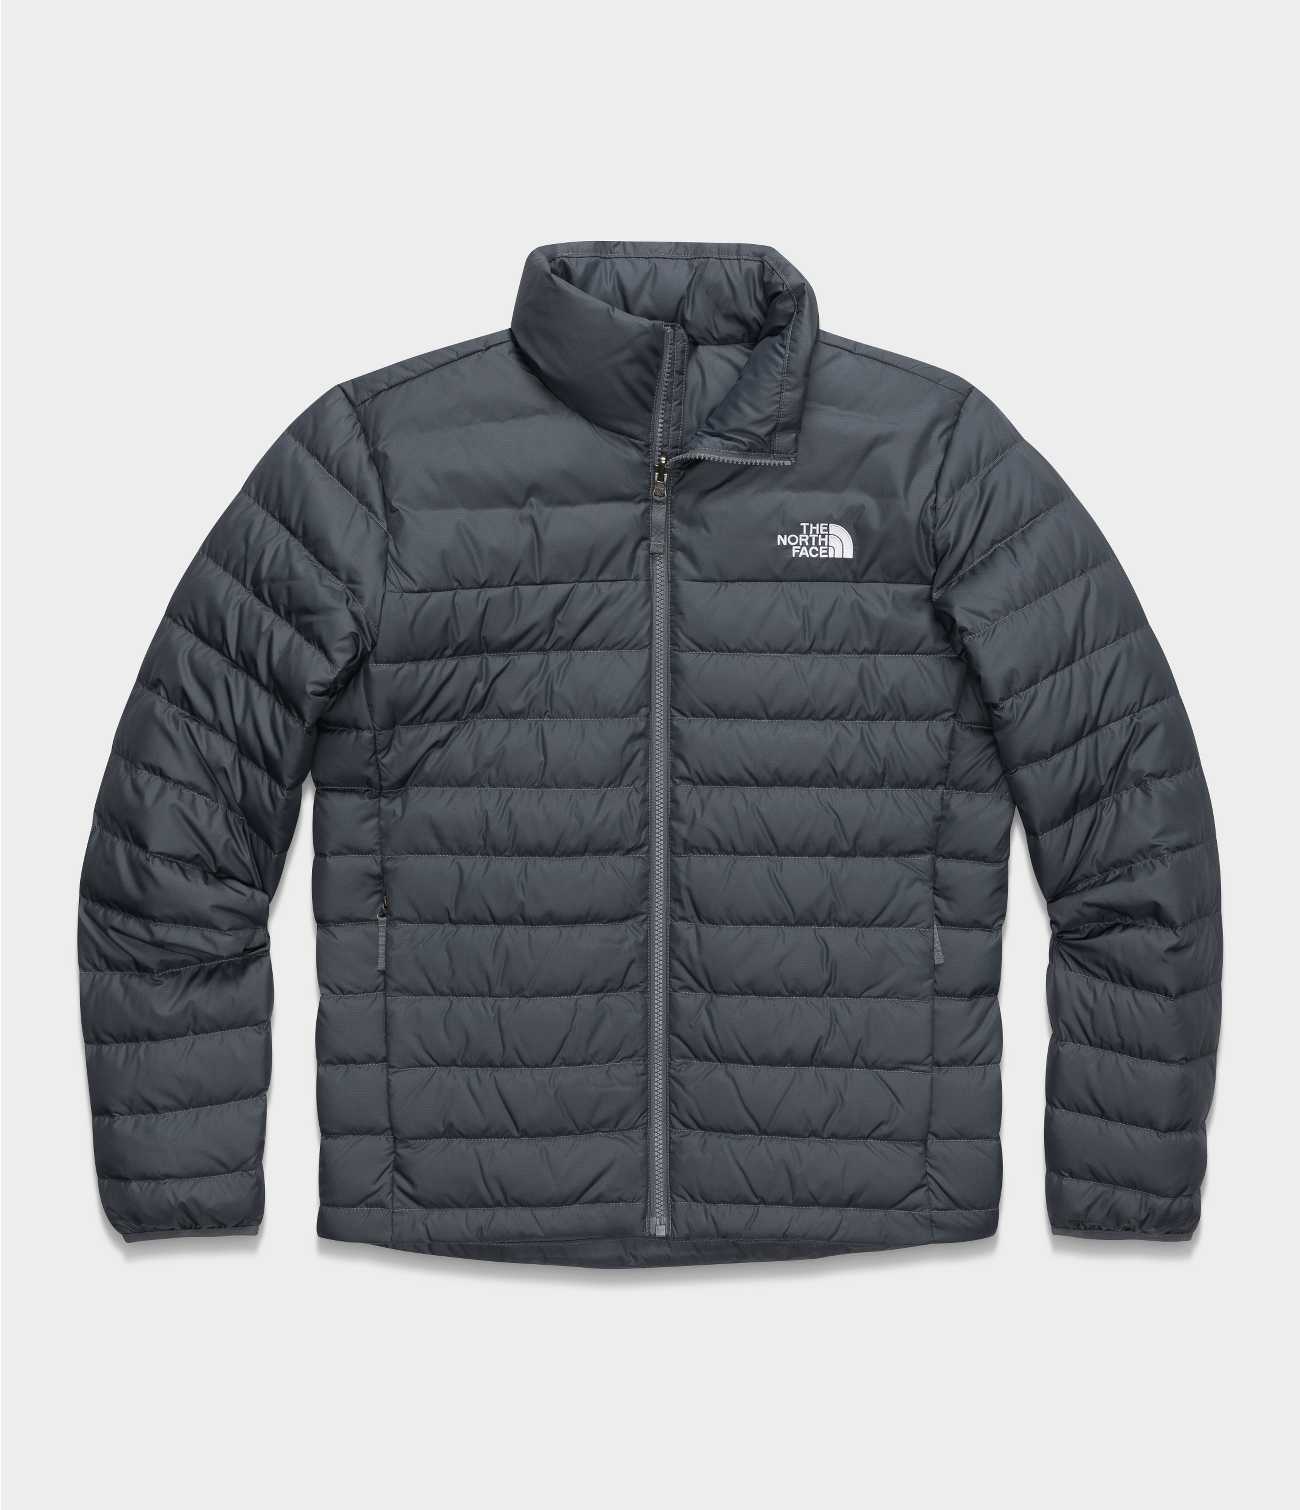 The North Face RENEWED by RÆBURN